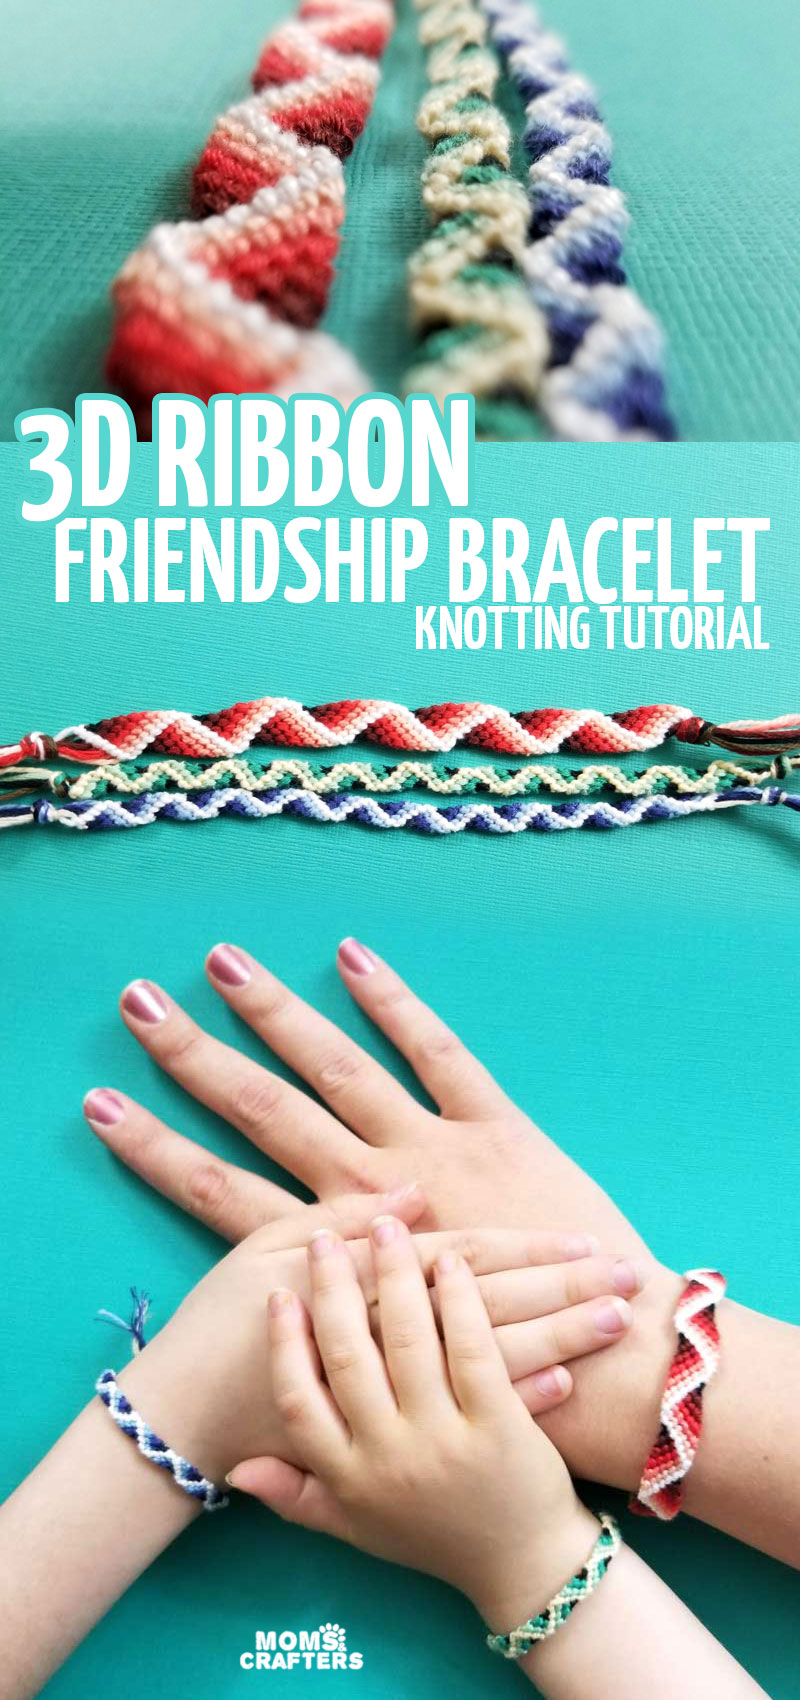 Embroidery Floss Friendship Bracelet Patterns Zig Zag Friendship Bracelet Pattern With A 3d Effect Moms And